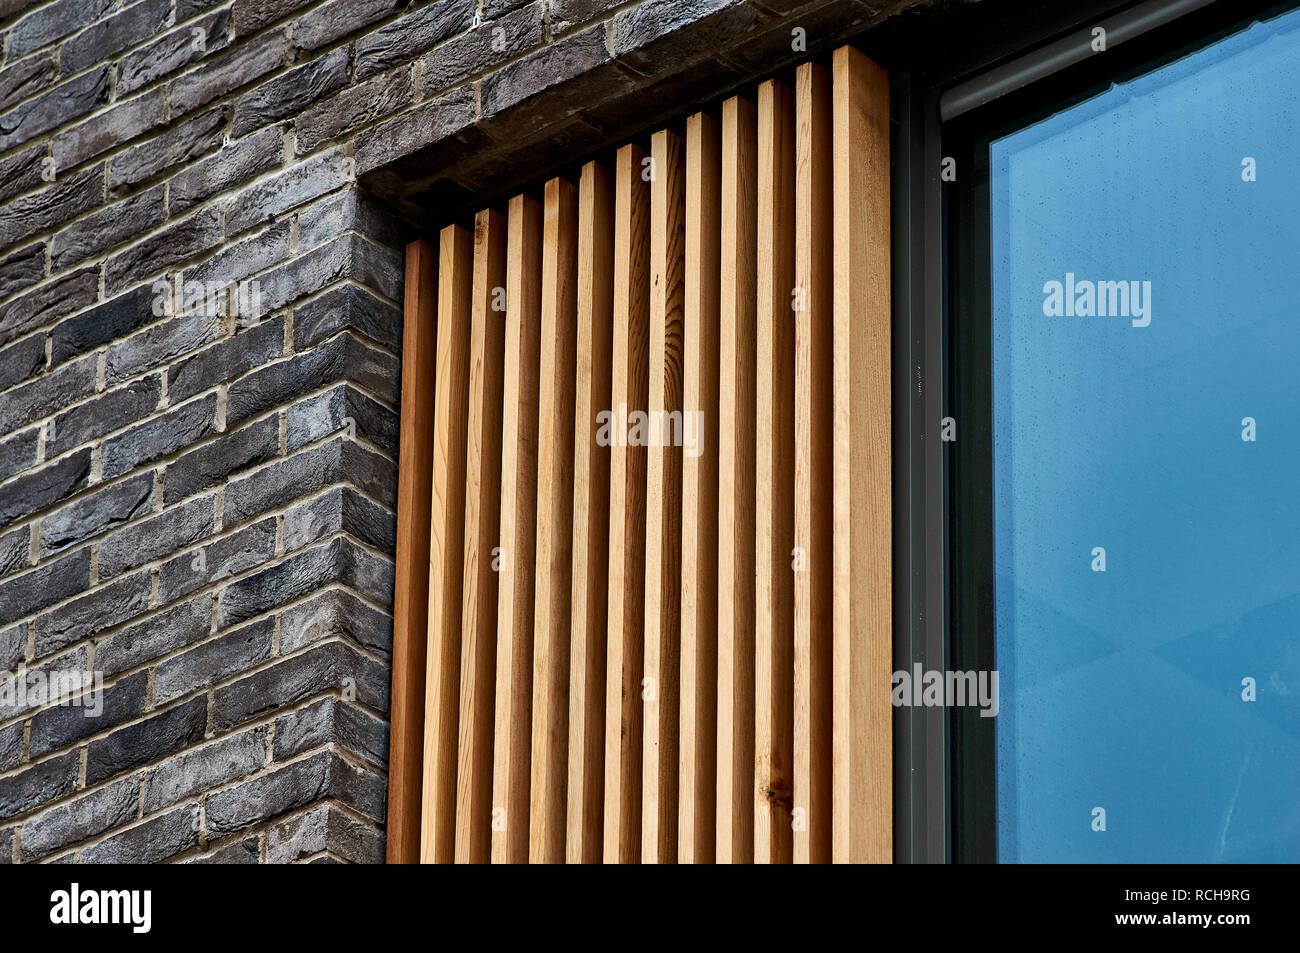 Architectural Close up details of the New Gorbals Health Centre, Glasgow. Stock Photo